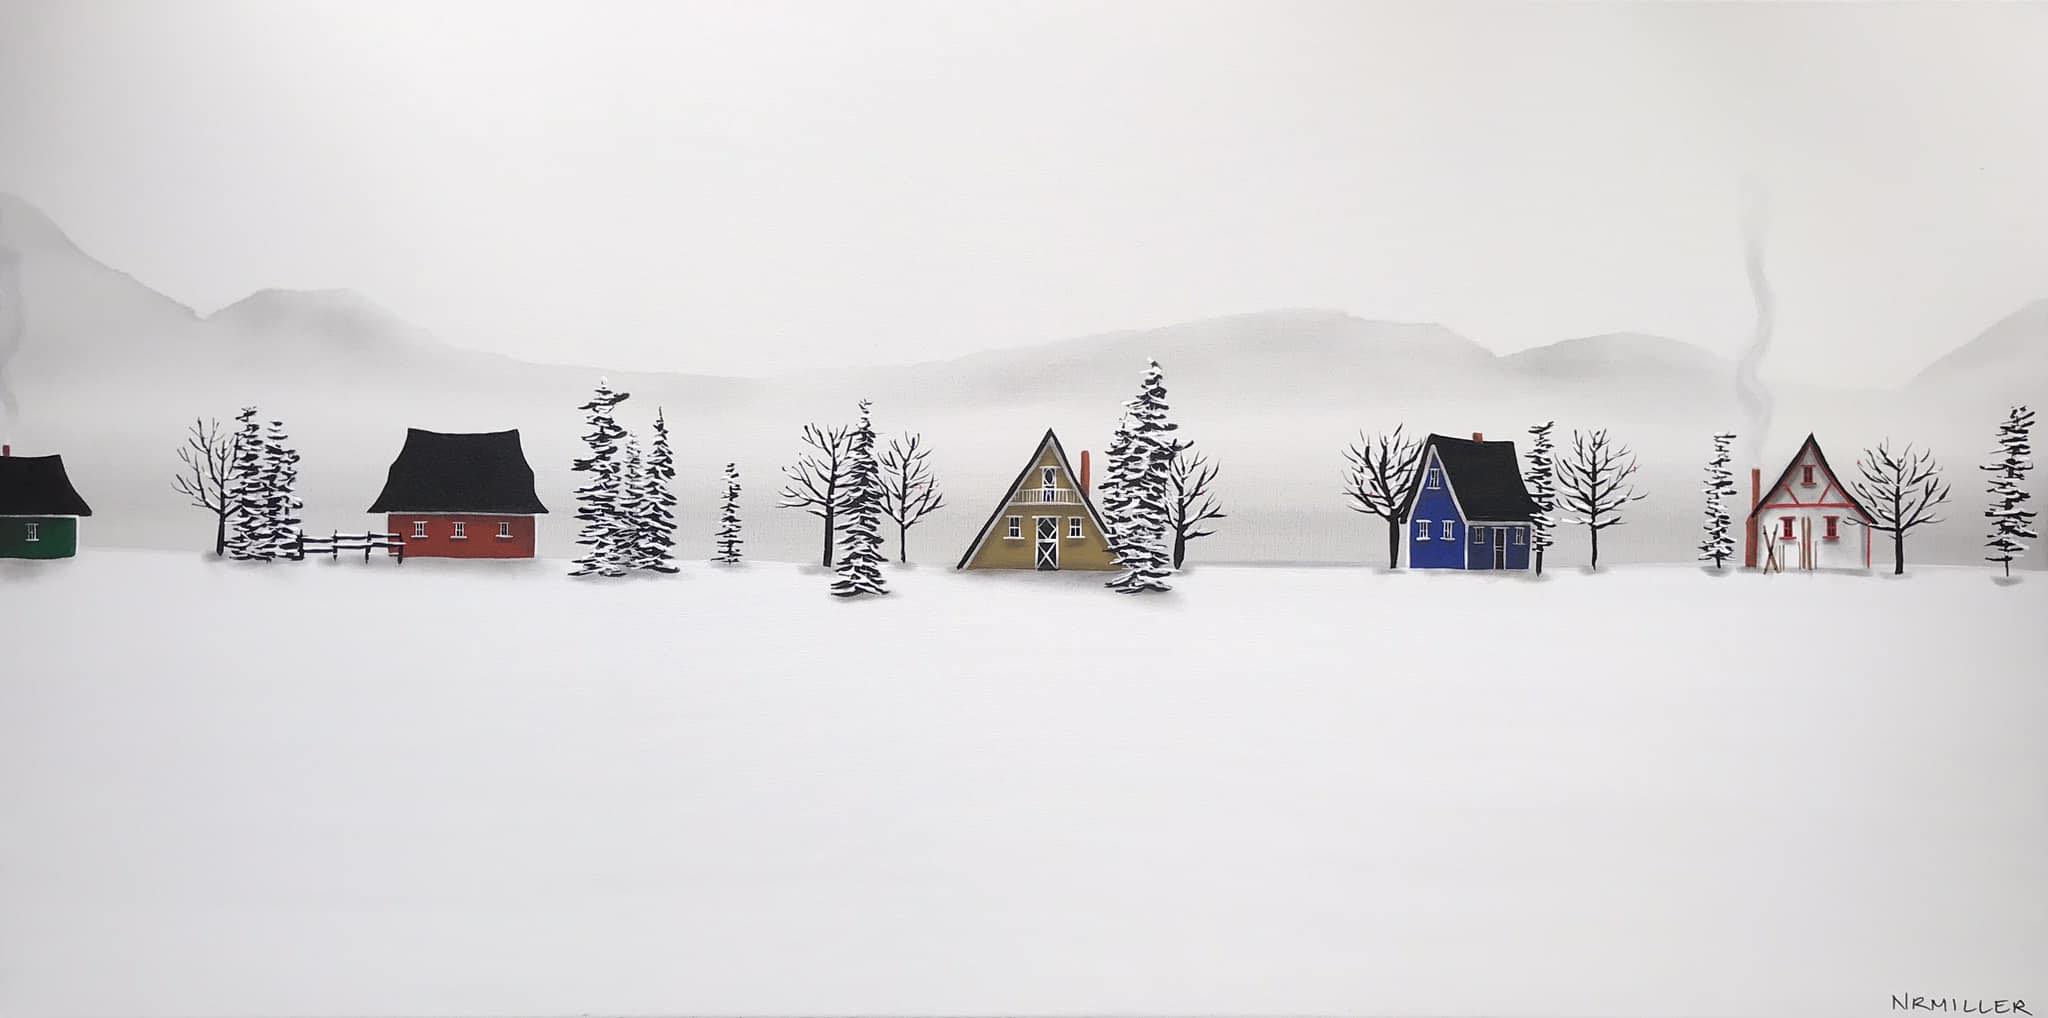 Our Winter Dens, mixed media landscape by Natasha Miller | Effusion Art Gallery + Cast Glass Studio, Invermere BC